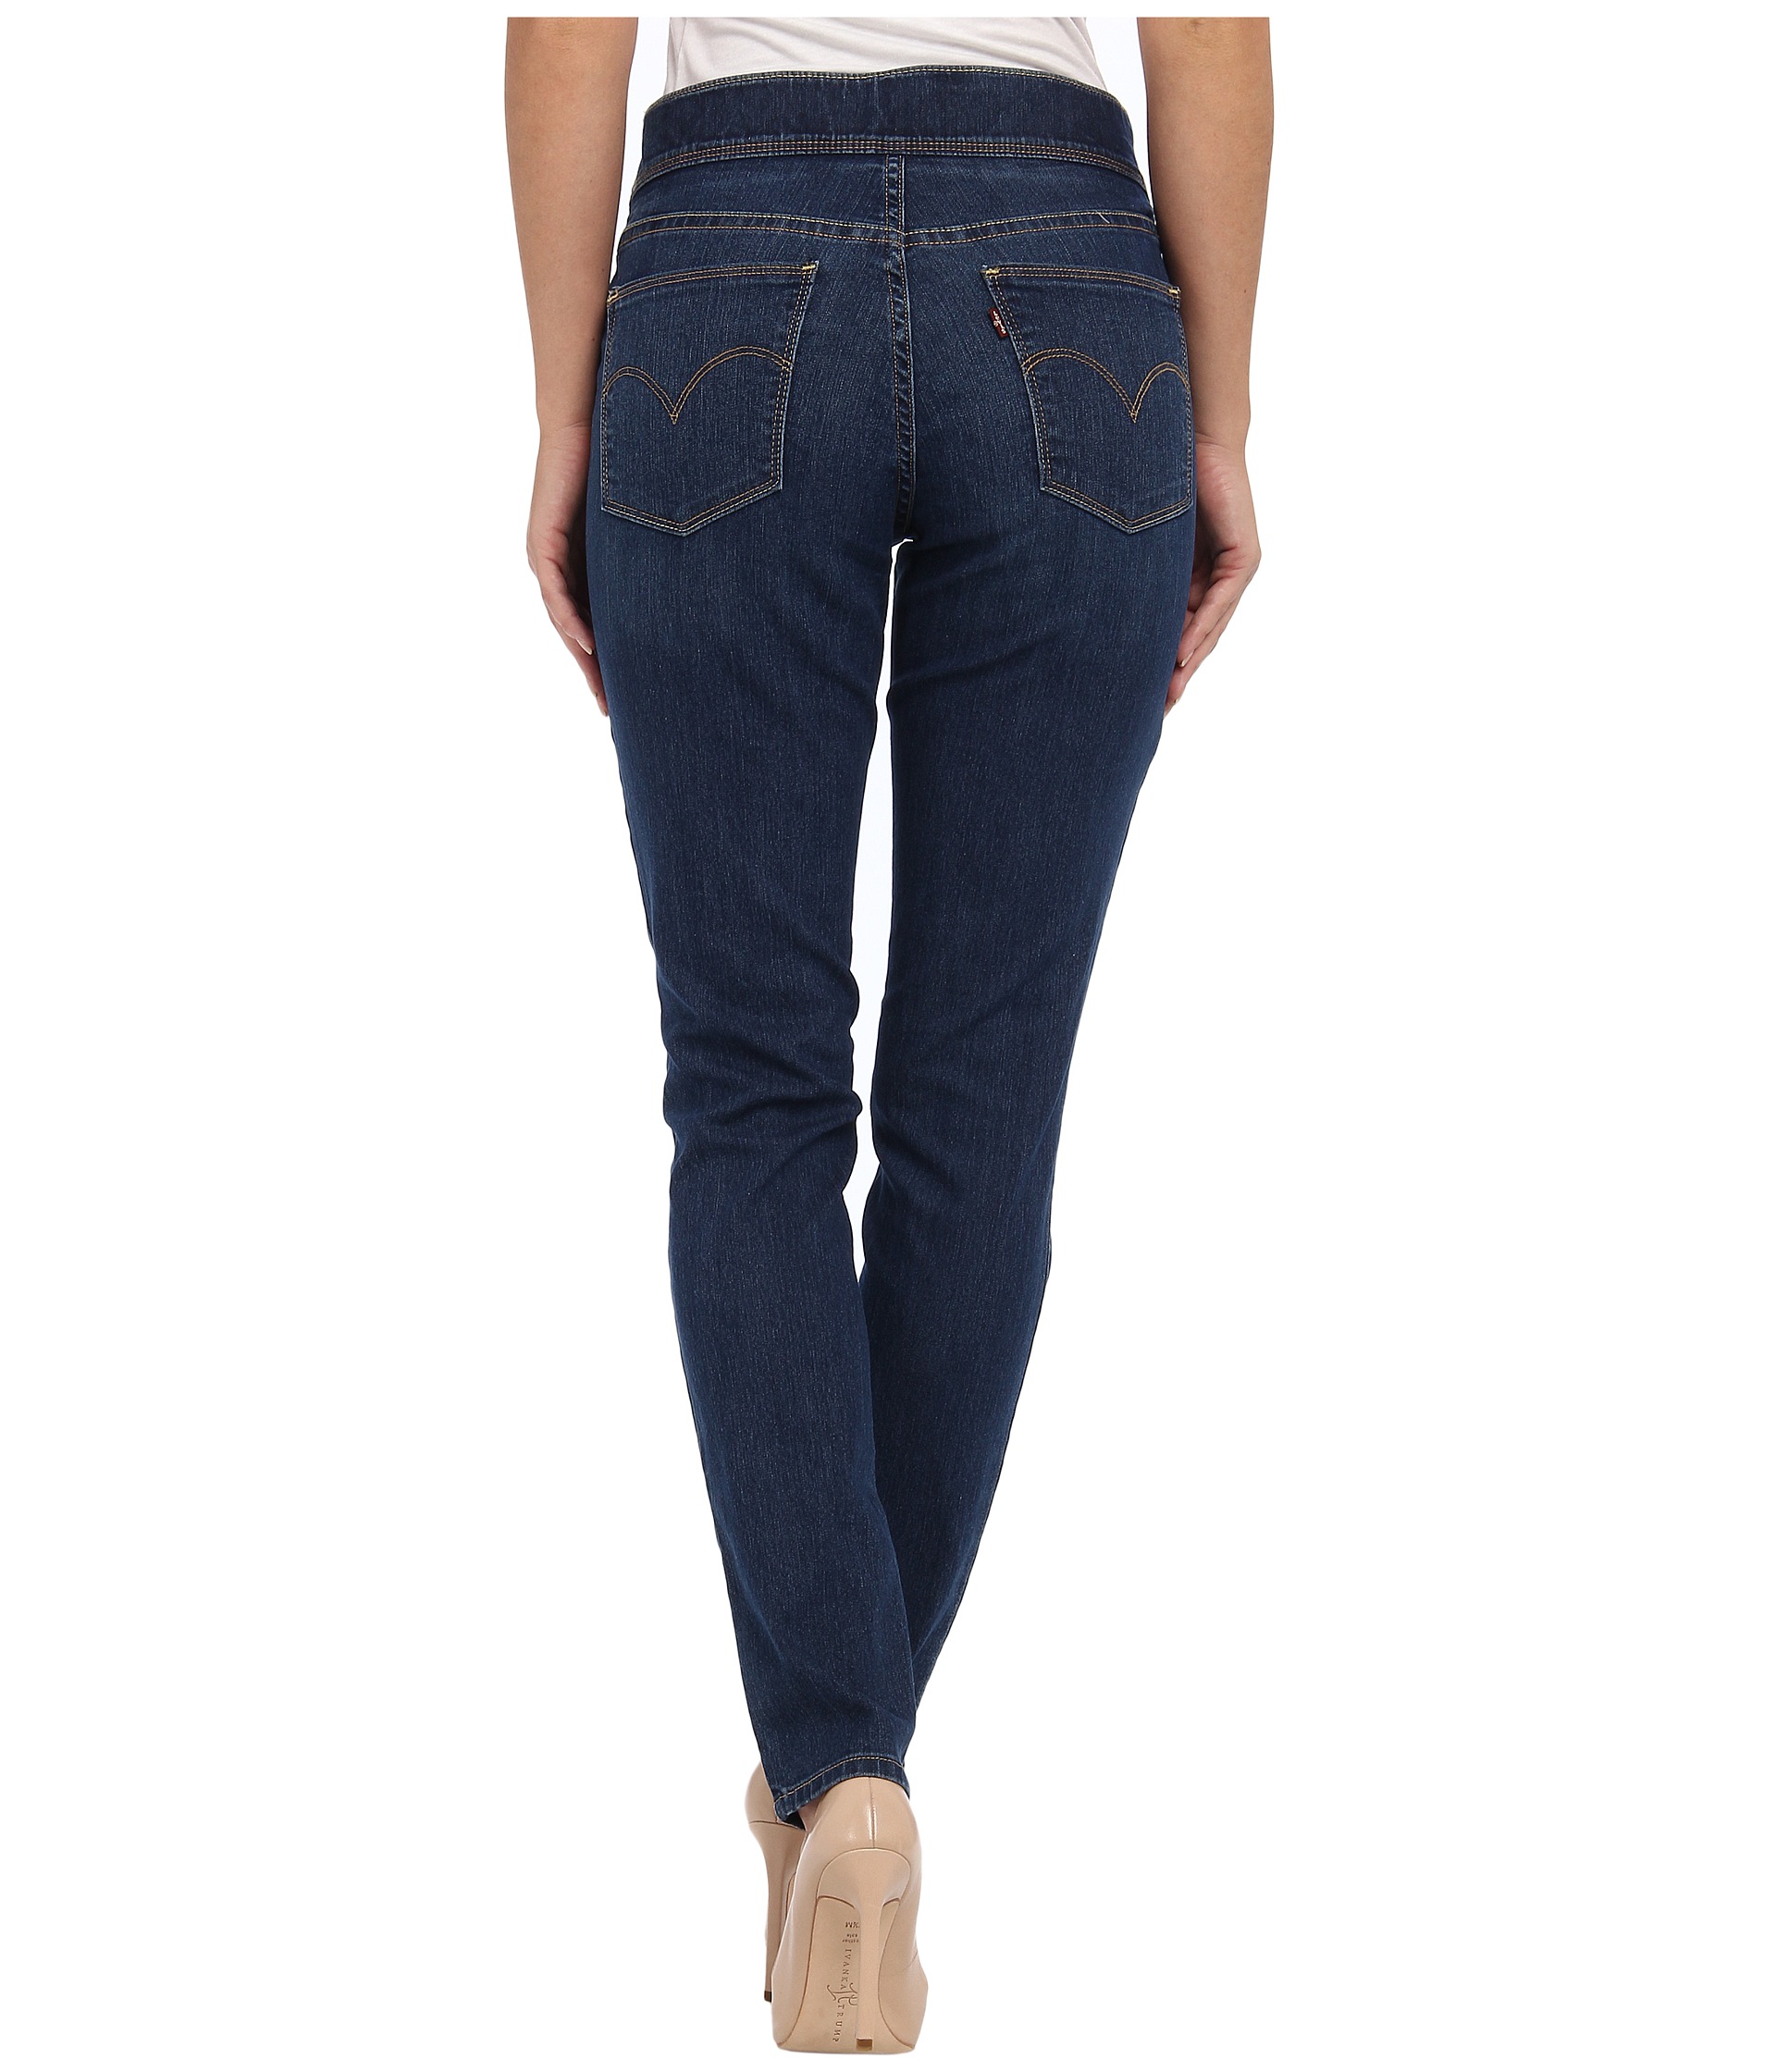 Levi's® Womens Perfectly Slimming Pull On Legging - Zappos.com Free ...